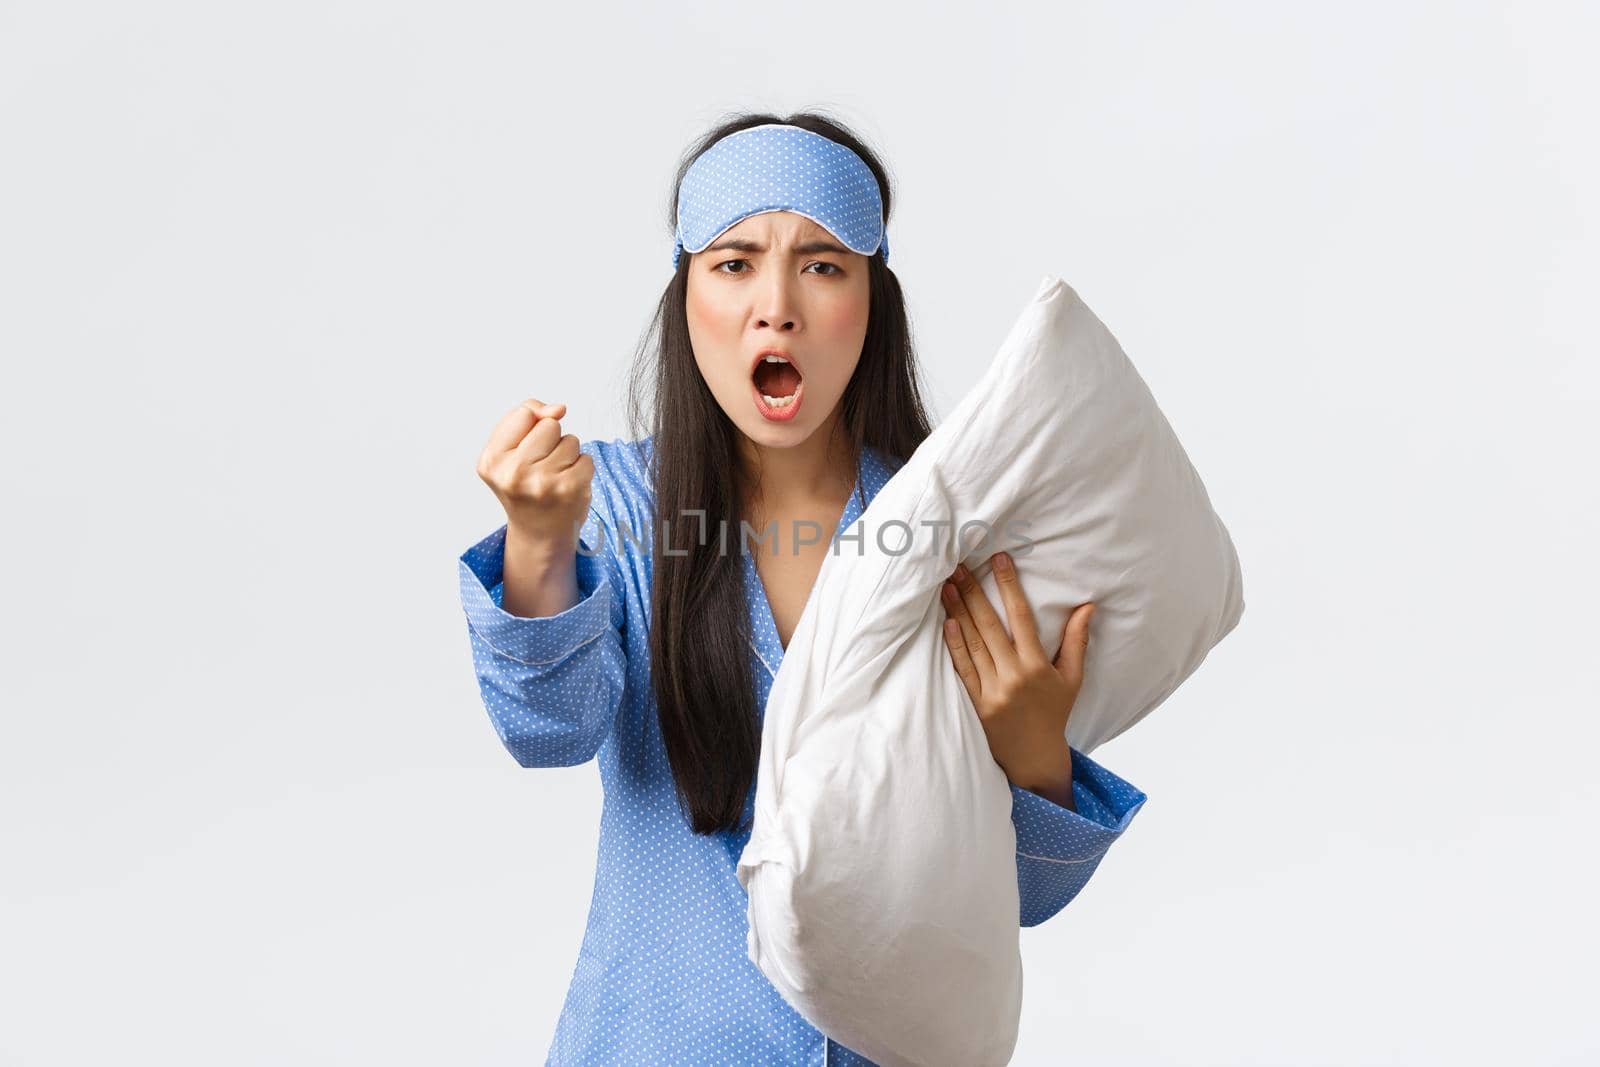 Angry and bothered exhausted asian girl complaining loud neighbours at dormitory, wearing sleeping mask and pajama, hold pillow and threaten someone with fist, cant sleep, scolding people being loud.